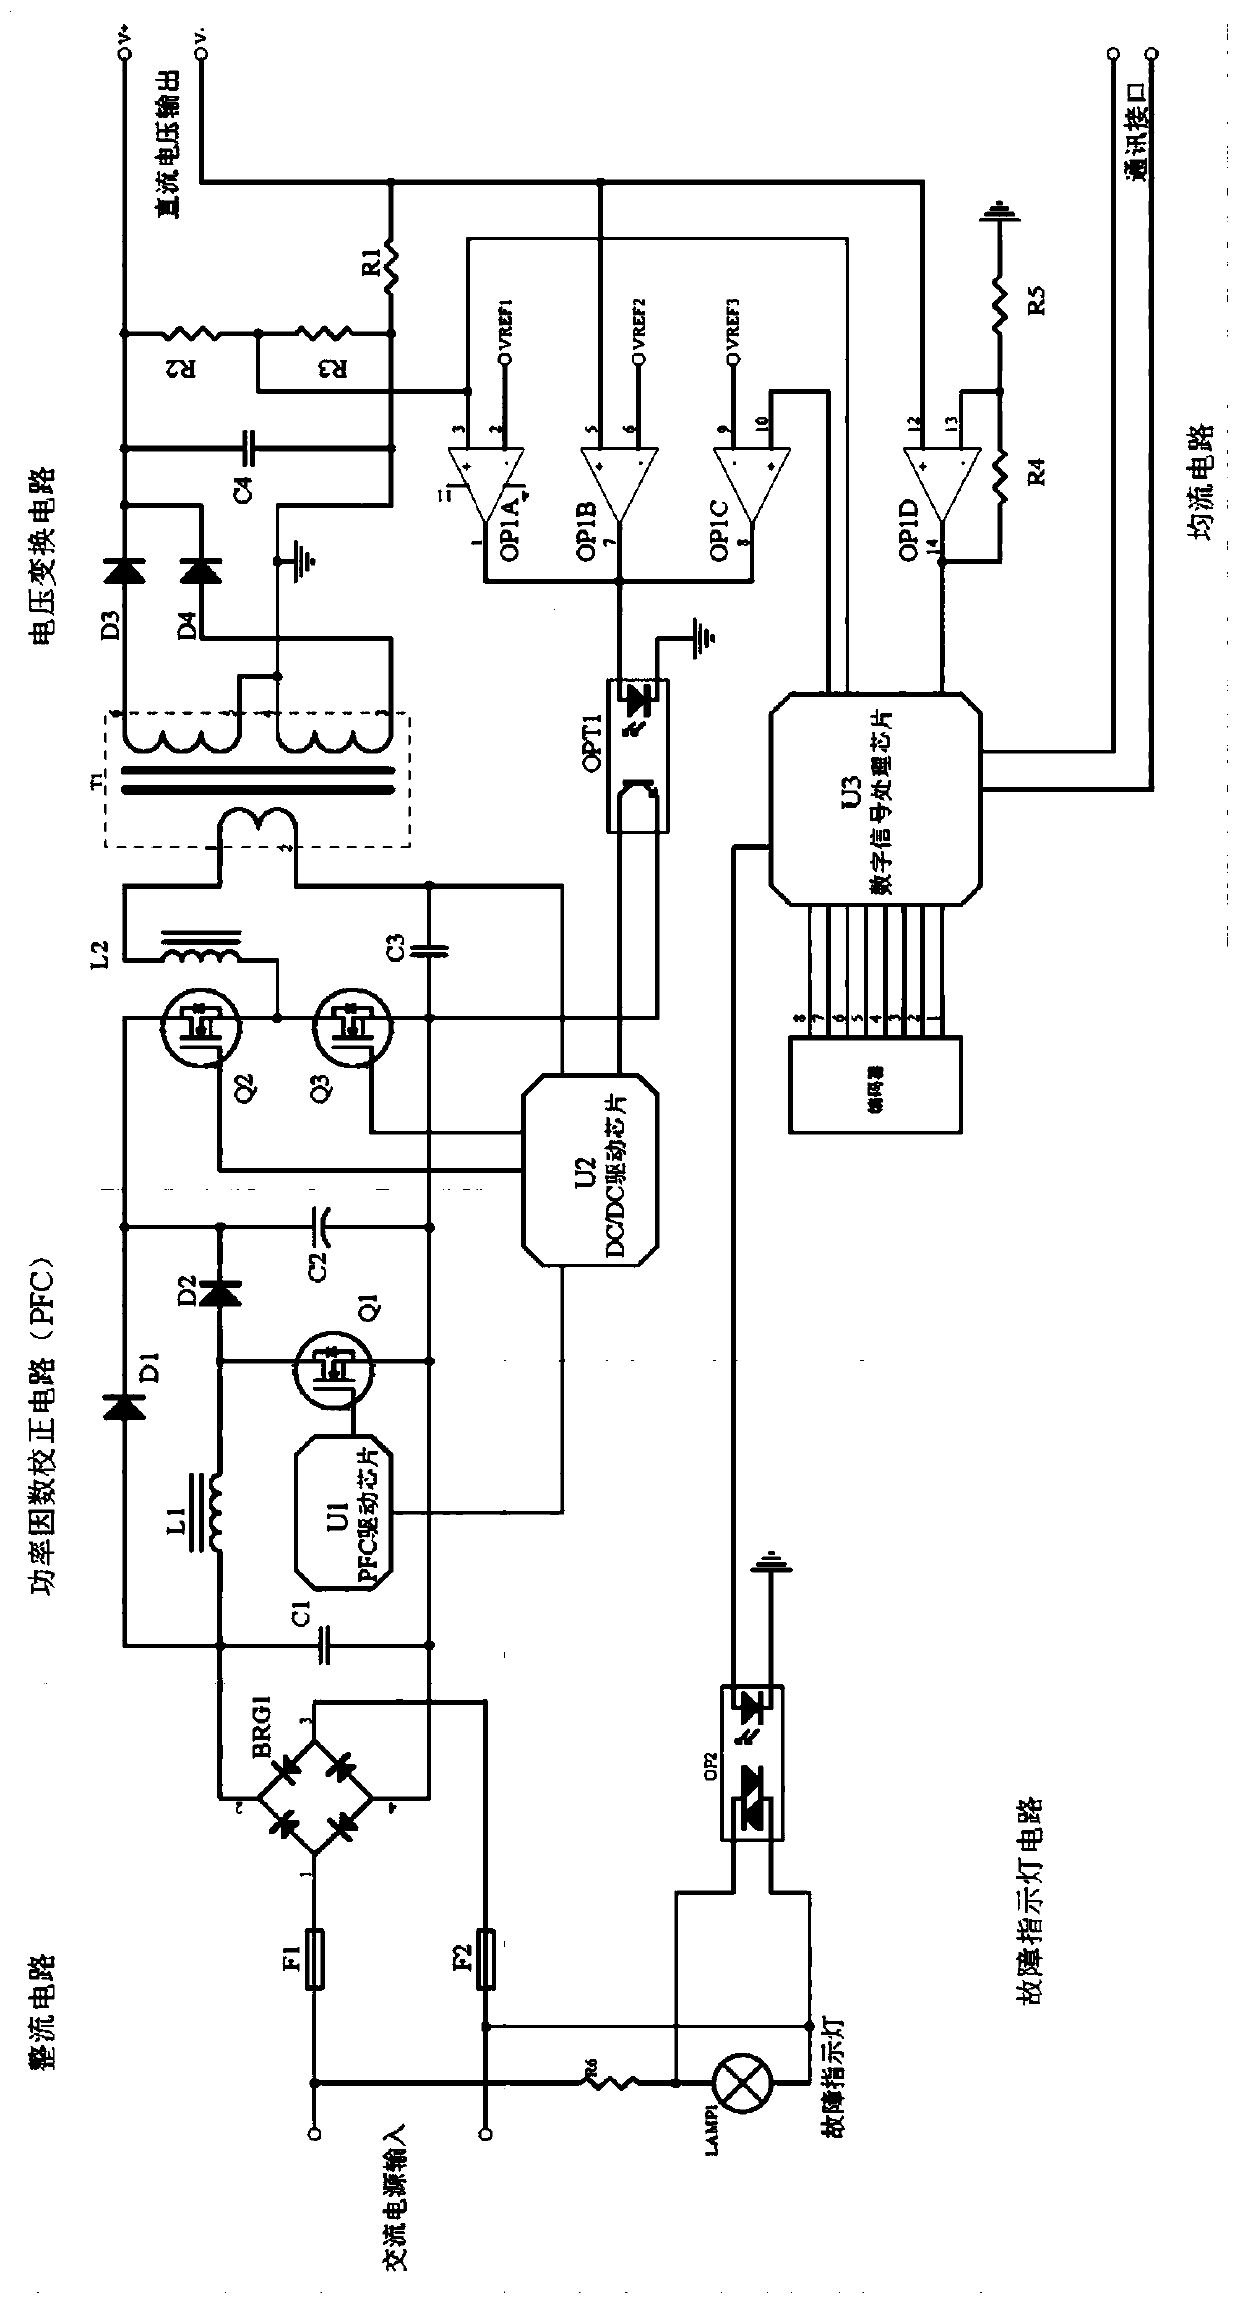 Building block switching power supply system